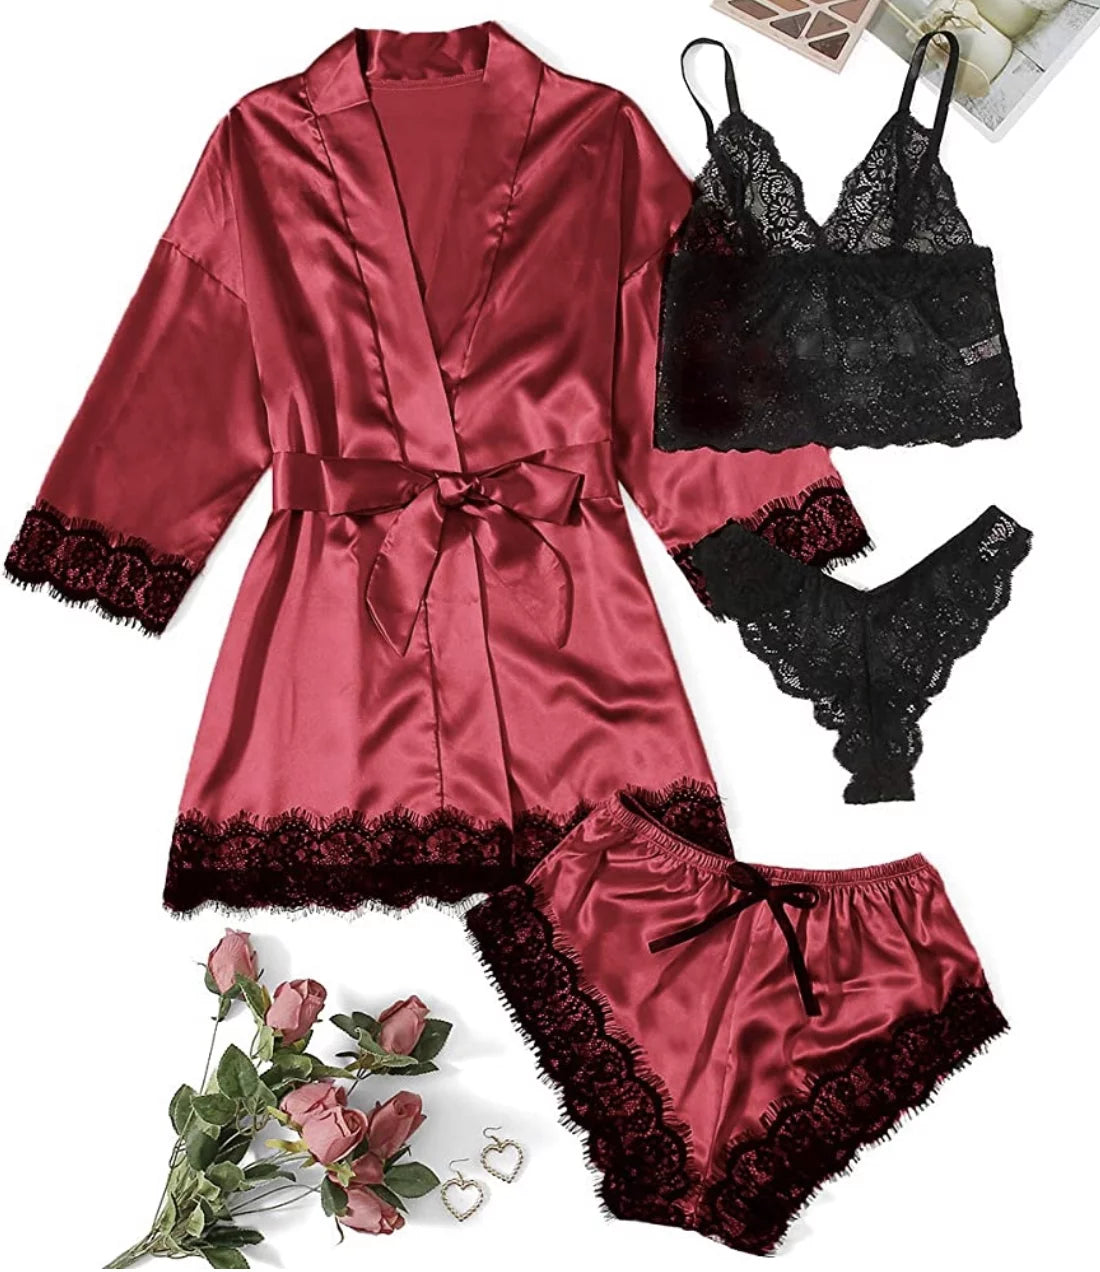 Sexy Lingerie,  Silk Satin Pajamas for Women, Womens Summer Pajamas Pjs Sets of 4 Pcs with Floral Lace Top Shorts and Robe, Gift for Women, Burgundy, L - Comfortably chic